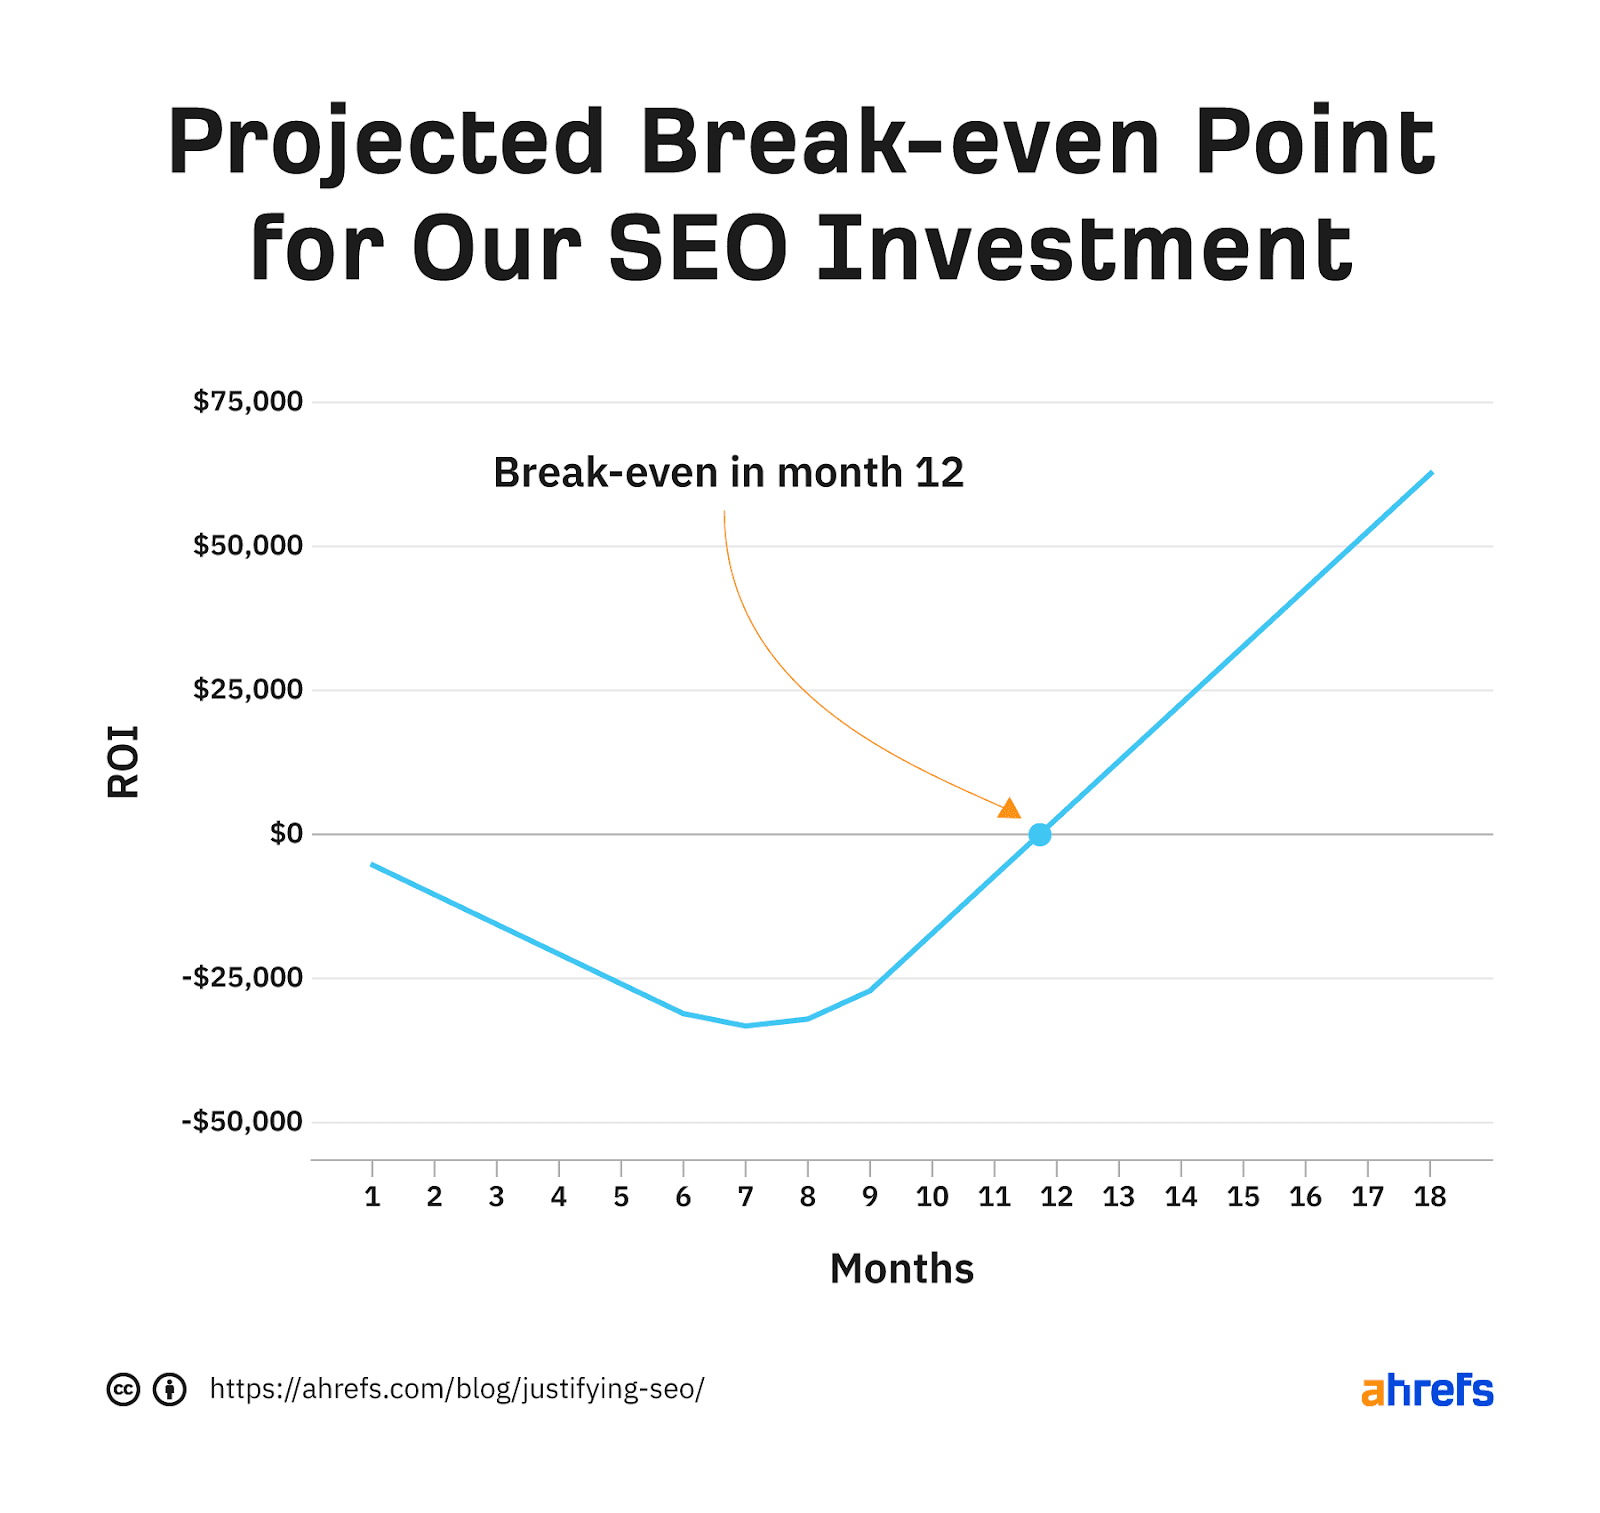 Chart showing projected break-even for SEO for startups investment happens in month 12